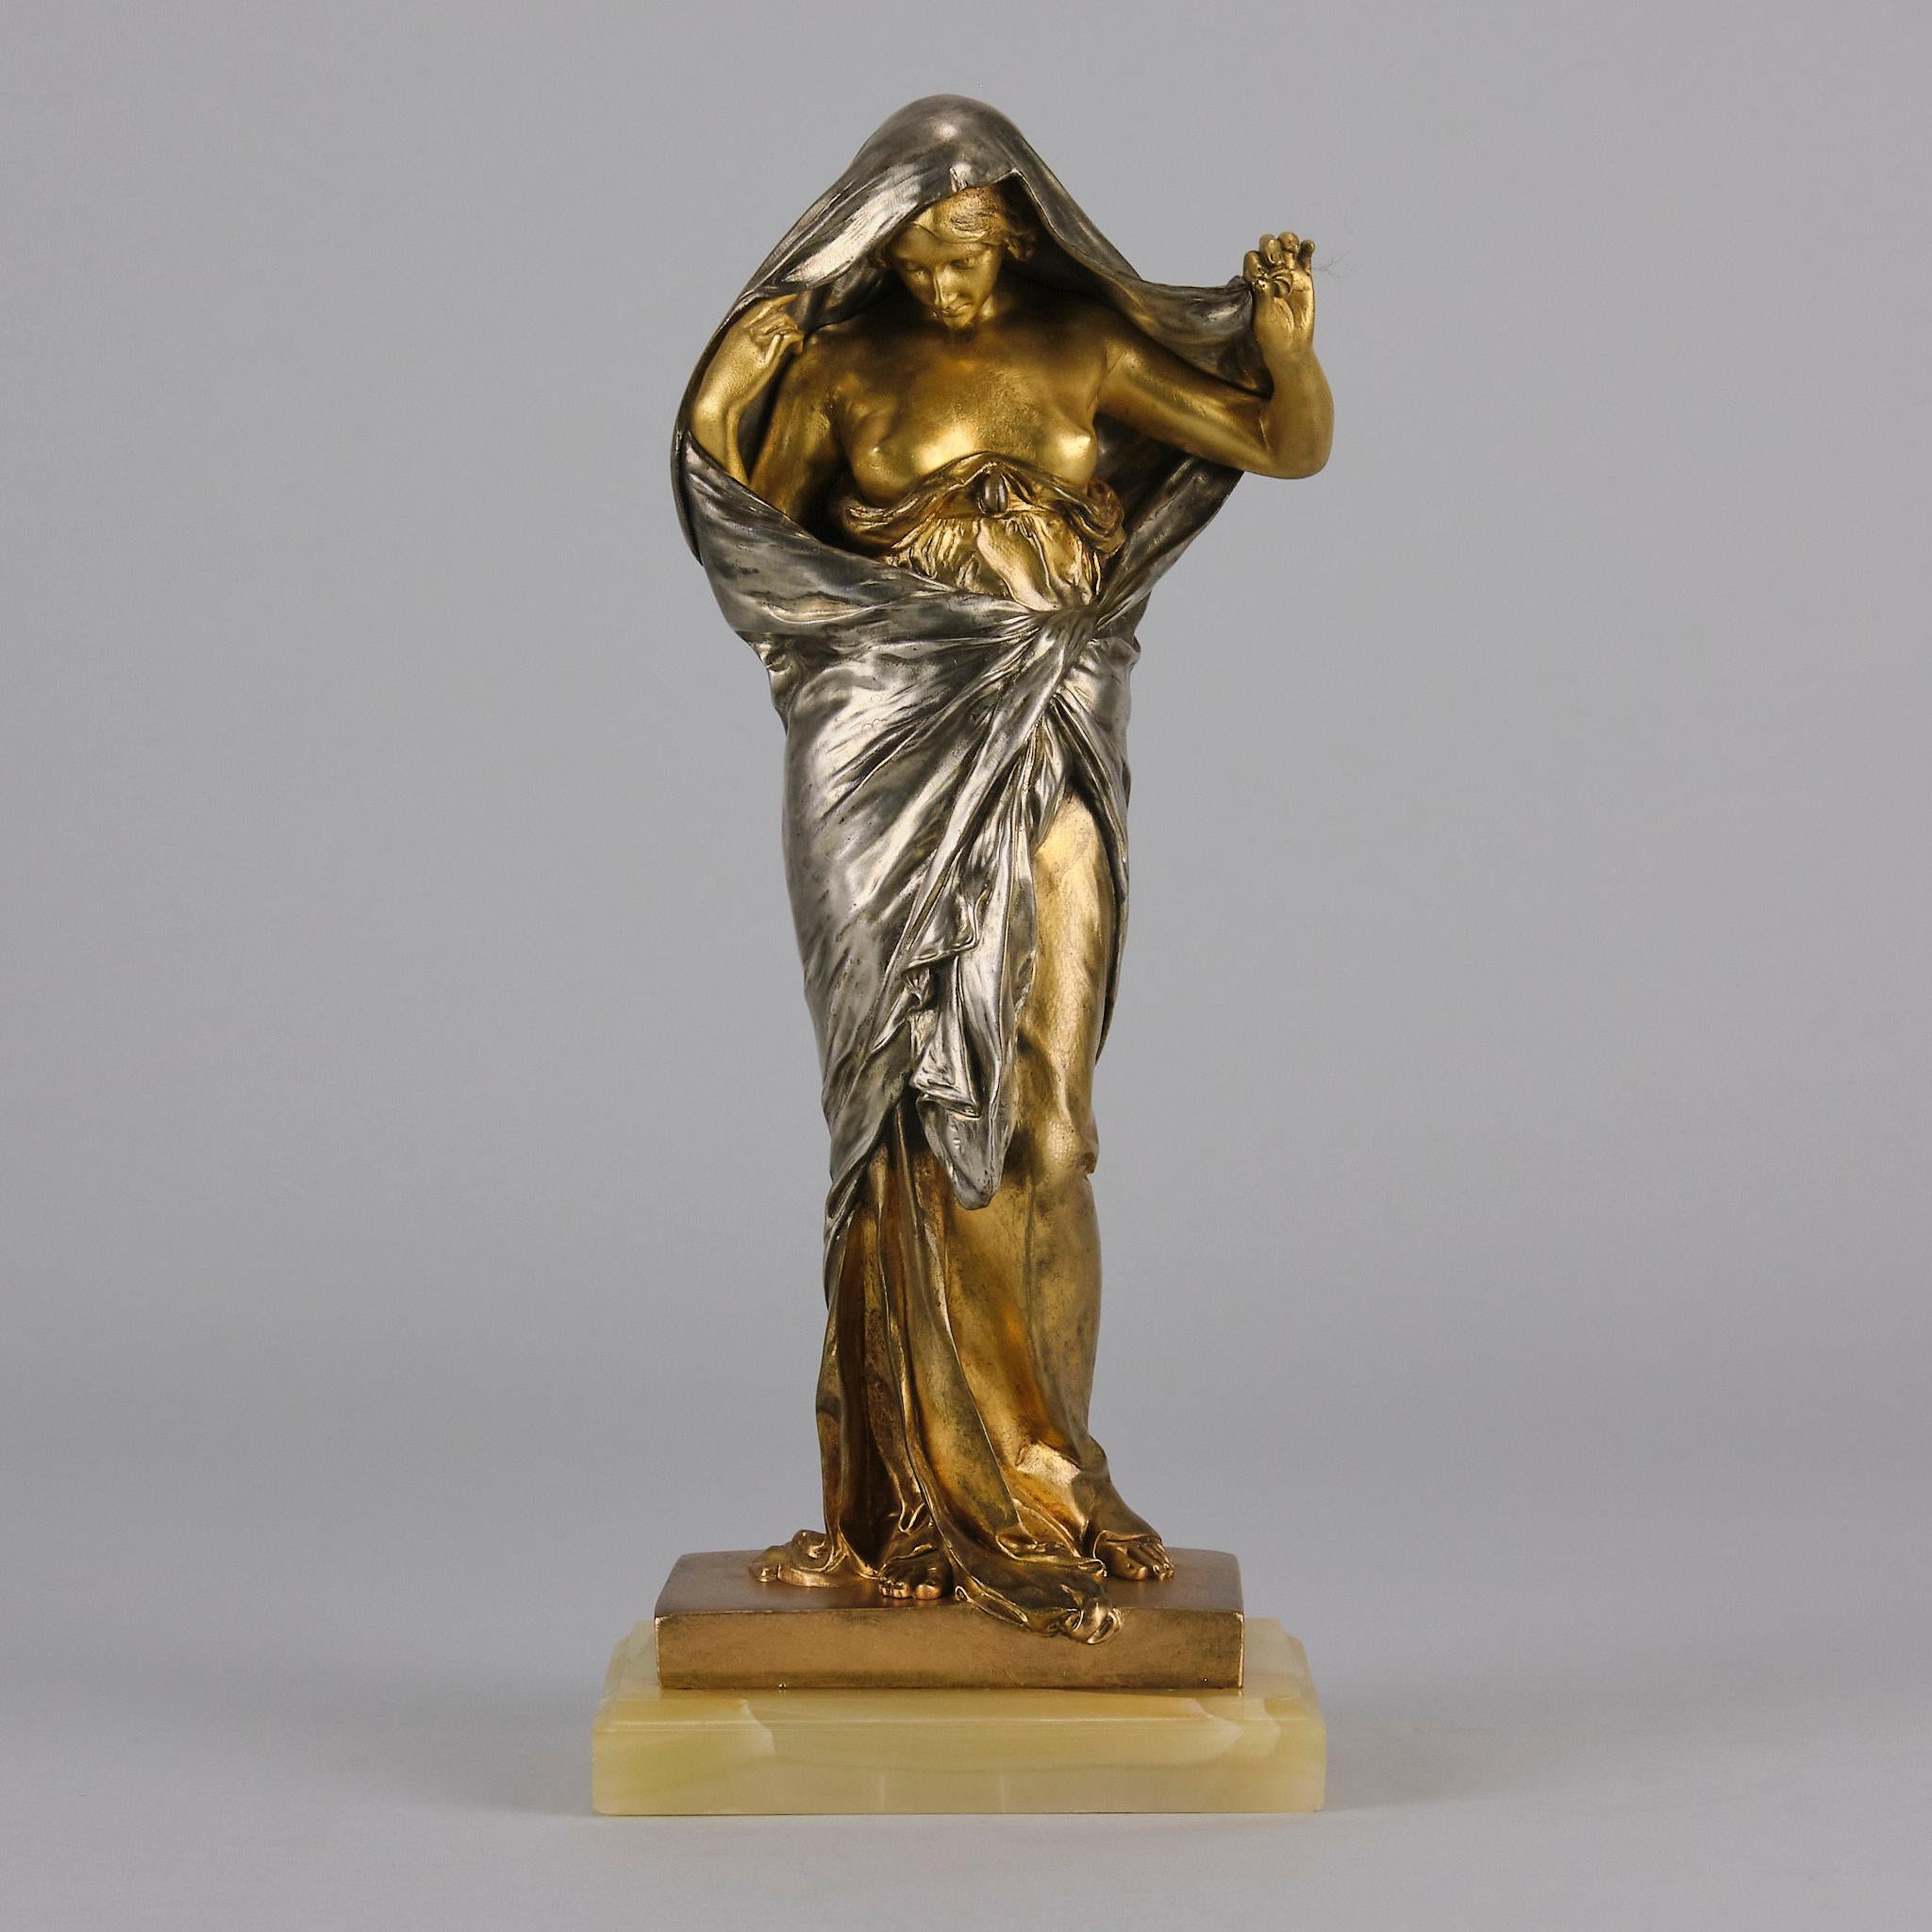 Wonderful late 19th Century French bronze figure of a seductively draped female figure representing, in allegorical form, Nature revealing her secrets to Science, a fitting theme for the late nineteenth century. The interest in nature literally